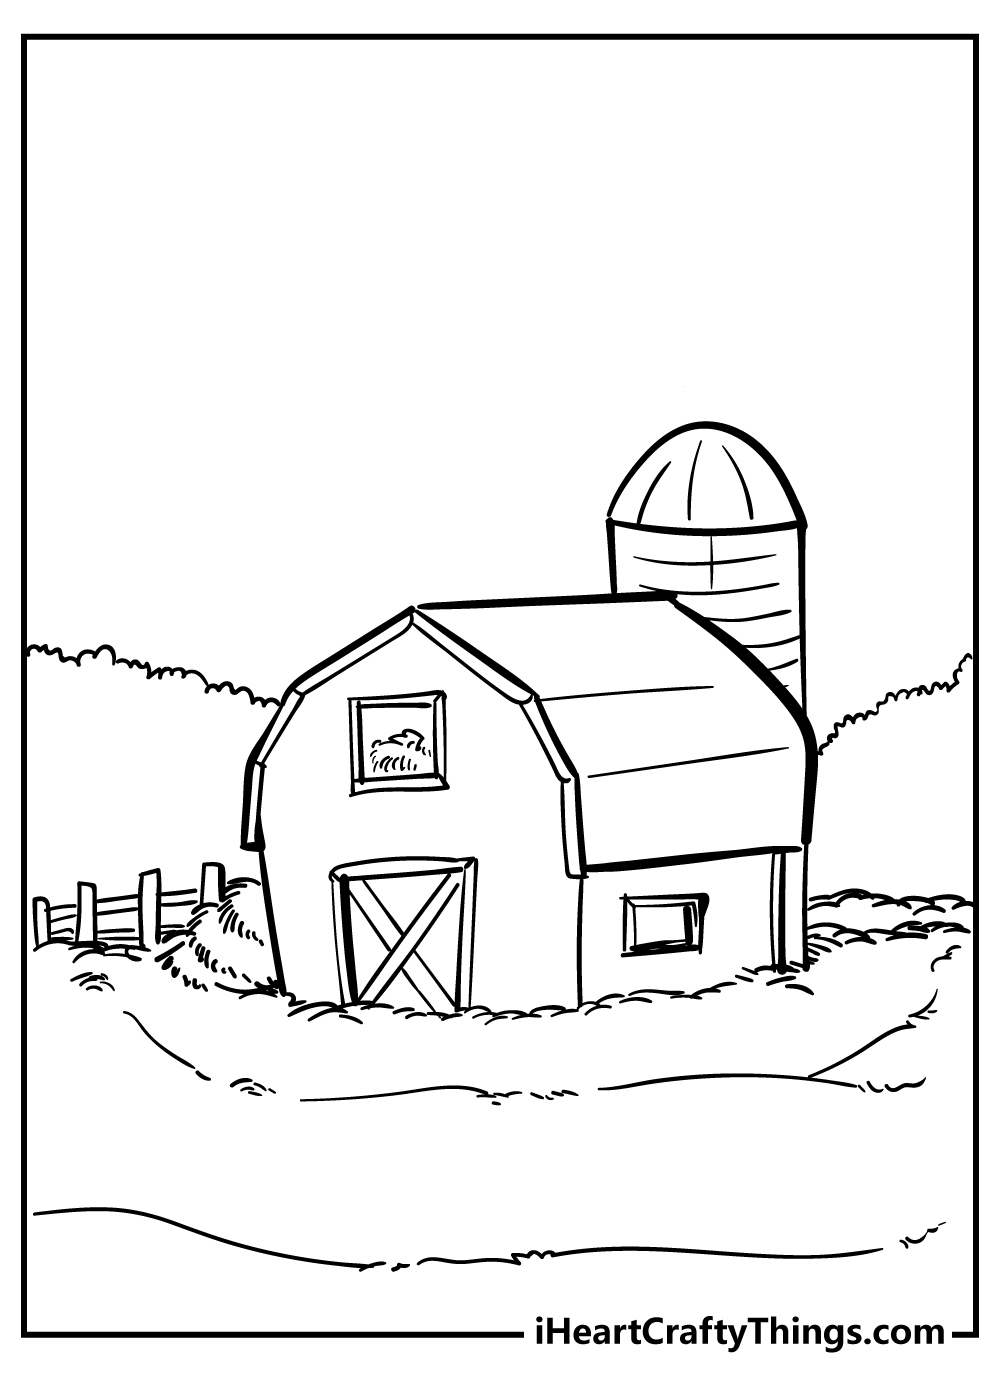 Barn Coloring Sheet for children free download